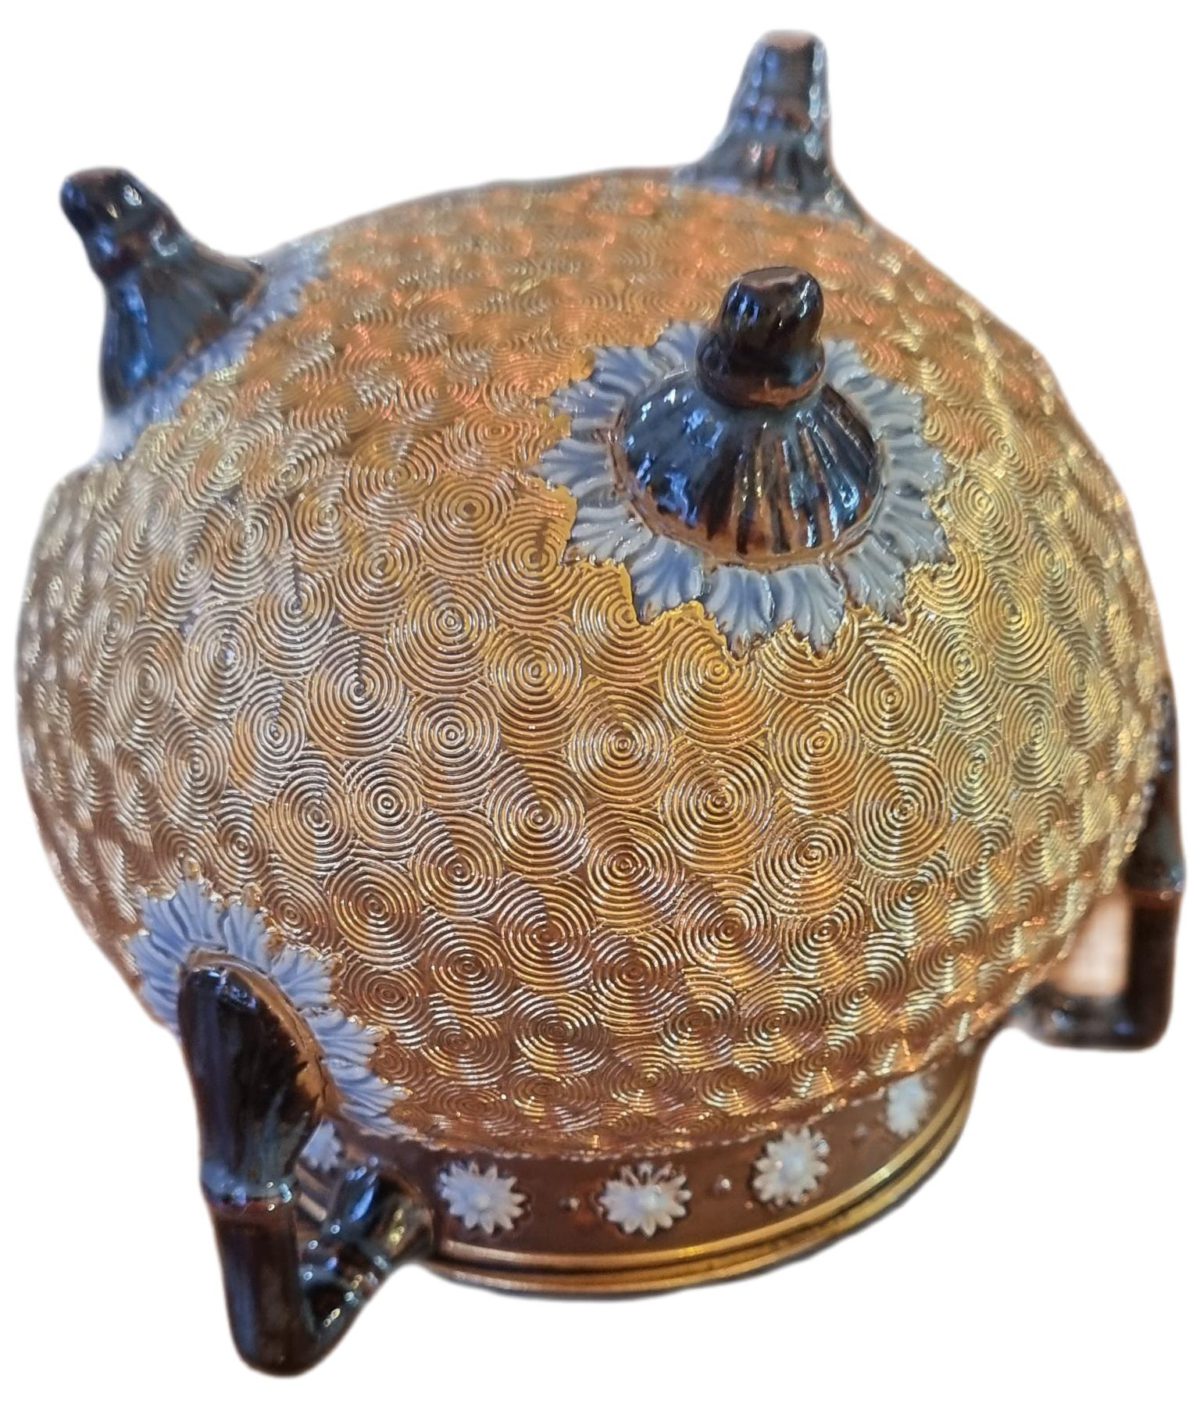 Royal Doulton pot circa 1904. Three Handled squat pot with gold spiral decoration to its body and brown glazed handles and rim with a touch of blue highlights. Photo of the base of the pot showing the 3 legs.